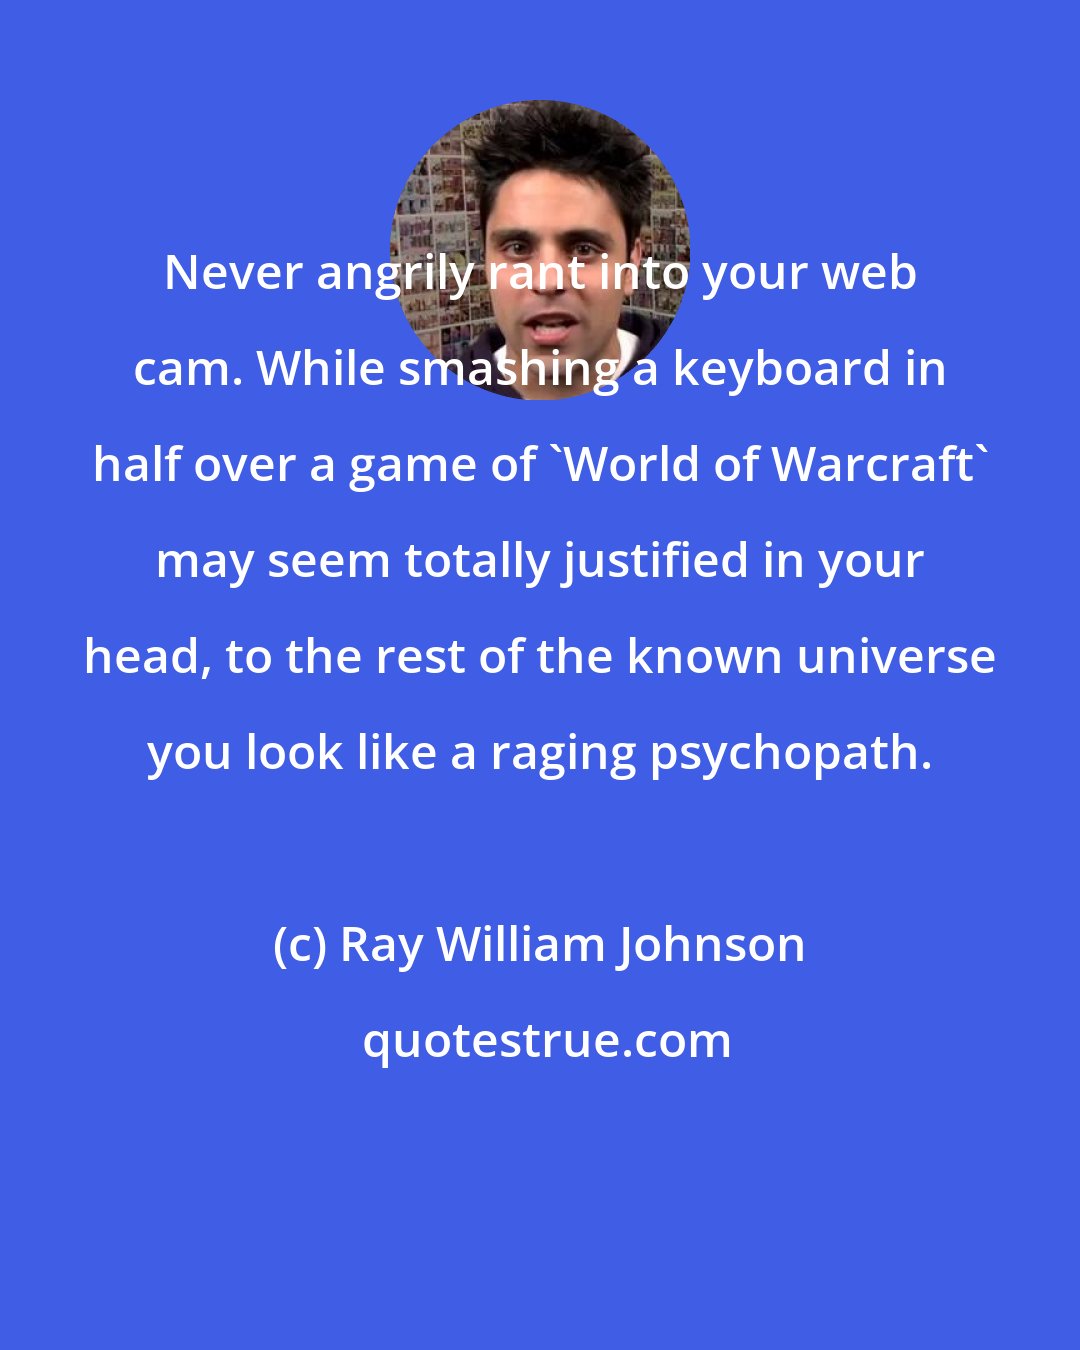 Ray William Johnson: Never angrily rant into your web cam. While smashing a keyboard in half over a game of 'World of Warcraft' may seem totally justified in your head, to the rest of the known universe you look like a raging psychopath.